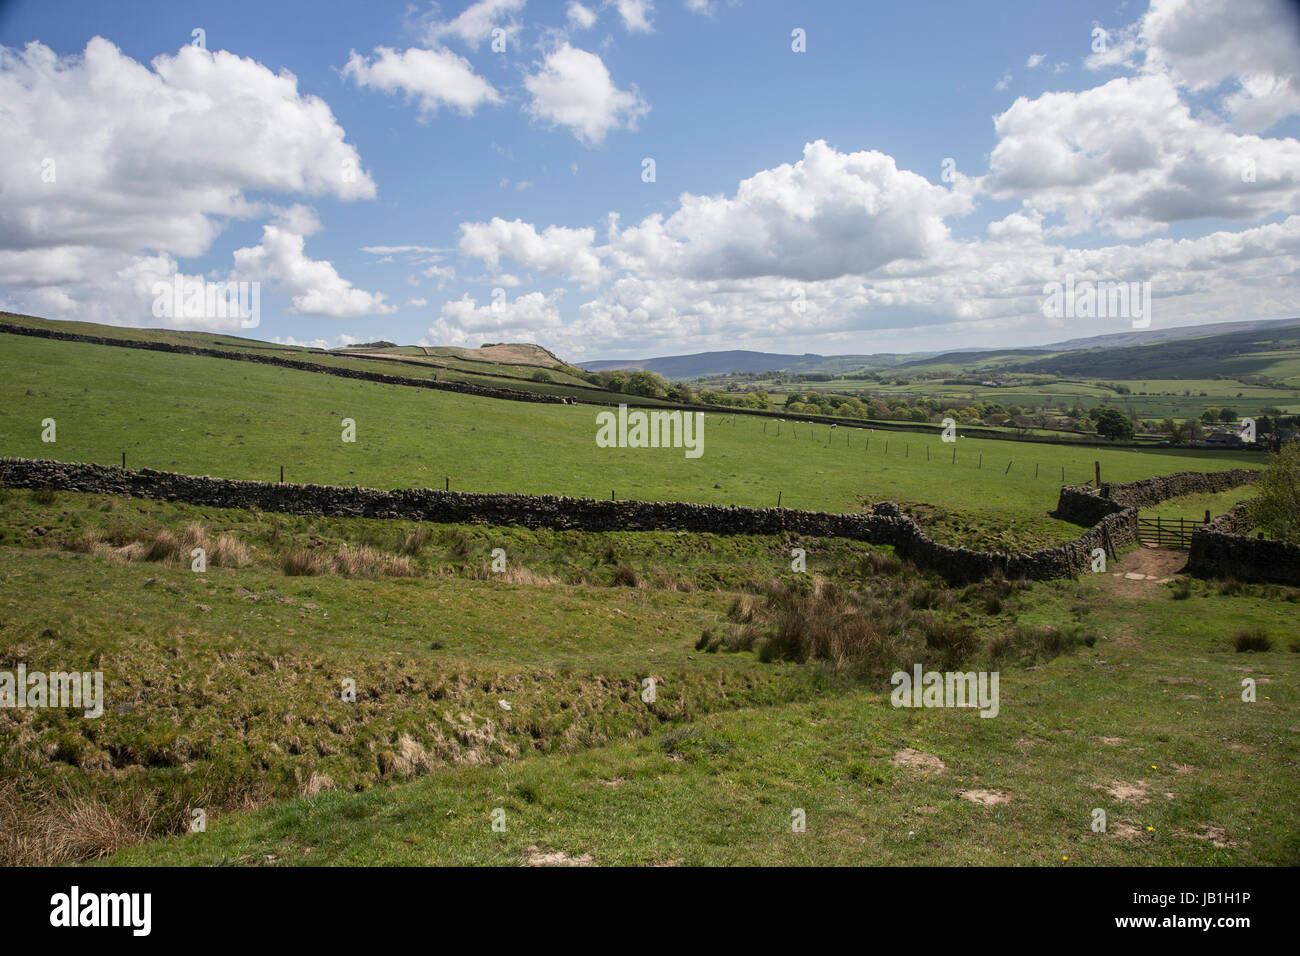 Looking towards Beamsley Beacon in the in the Yorkshire Dales, Nr Skipton, North Yorkshire, UK Stock Photo